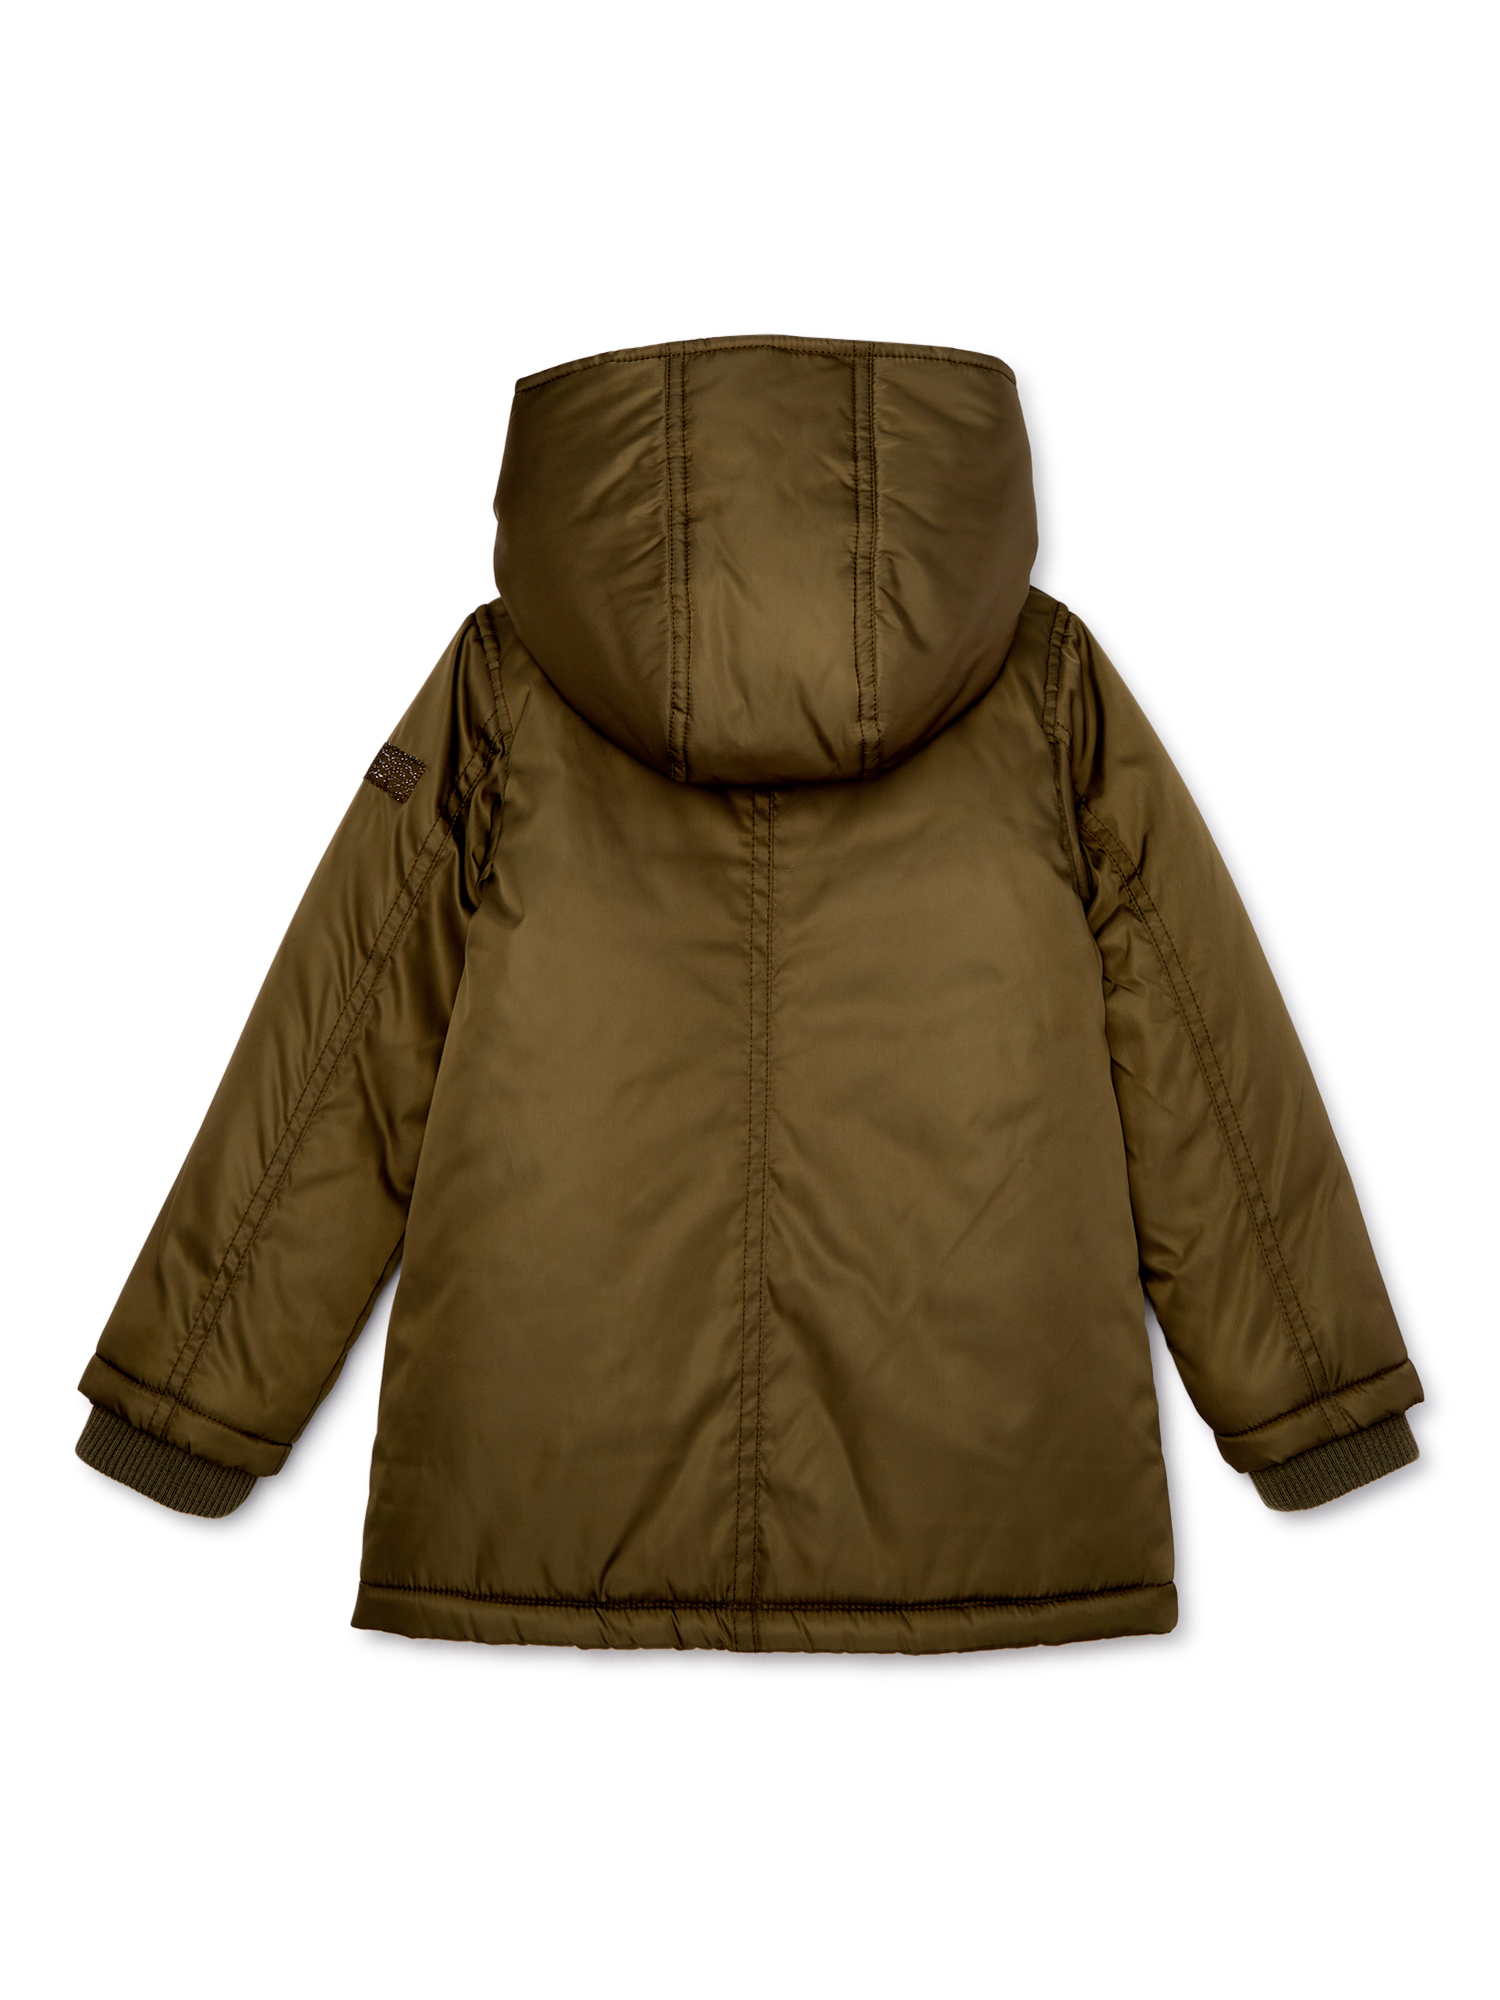 Bhip Girls 4-16 Heavy Weight Lined Parka Coat - image 2 of 3